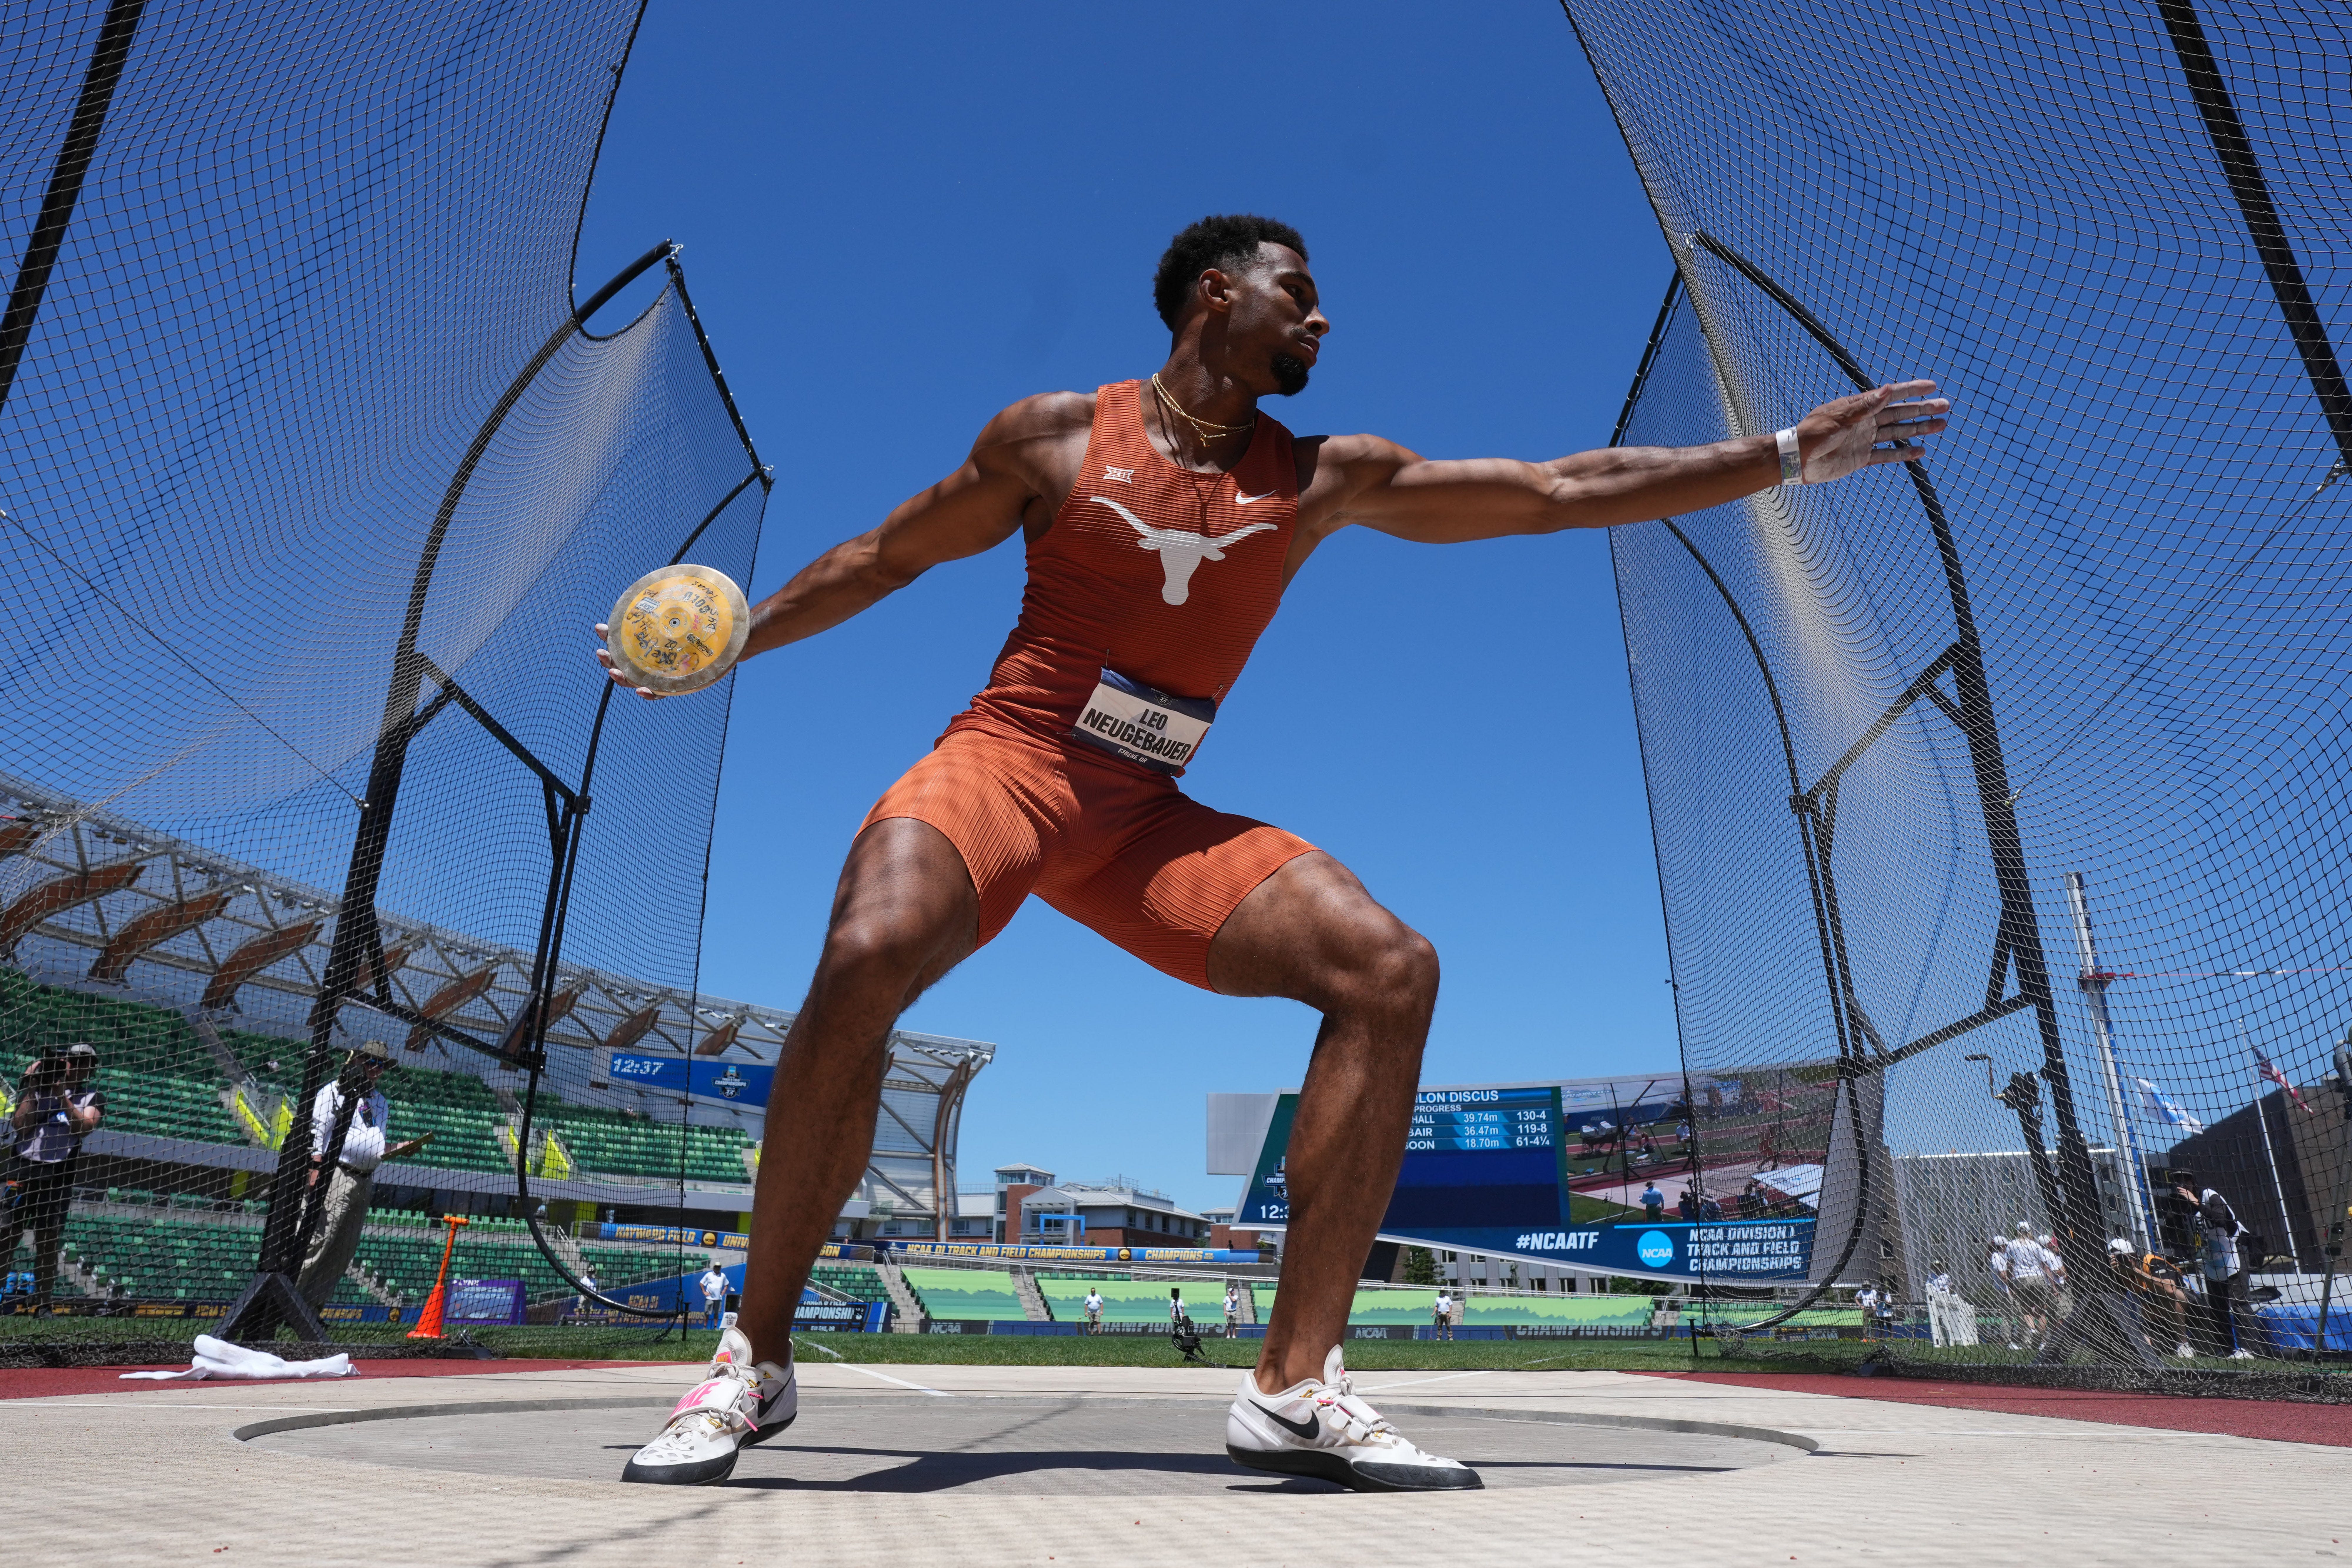 Texas' Leo Neugebauer sets decathlon discus record at NCAA outdoor track championships